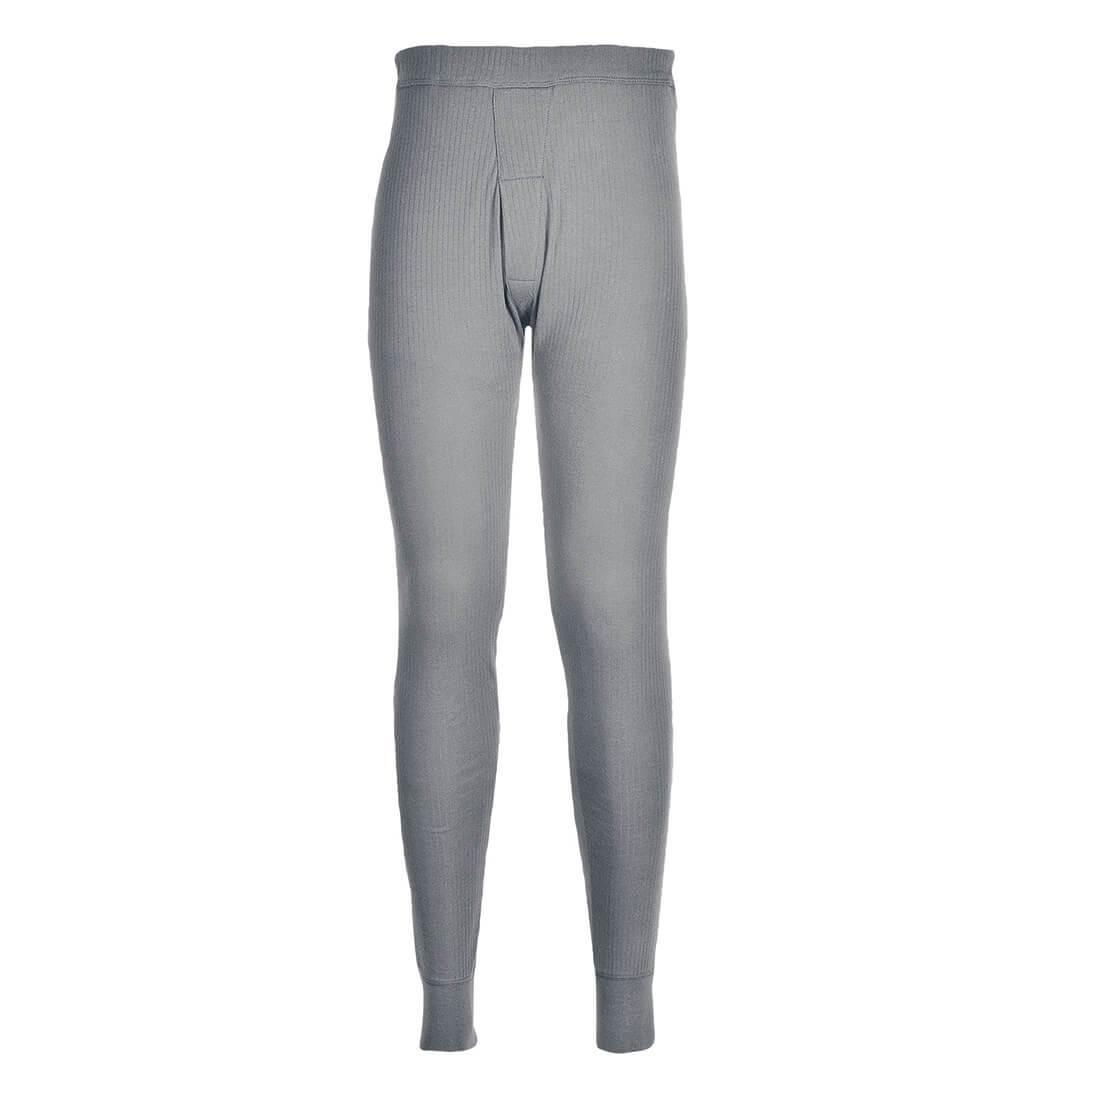 Image of Portwest Thermal Trousers Grey 3XL